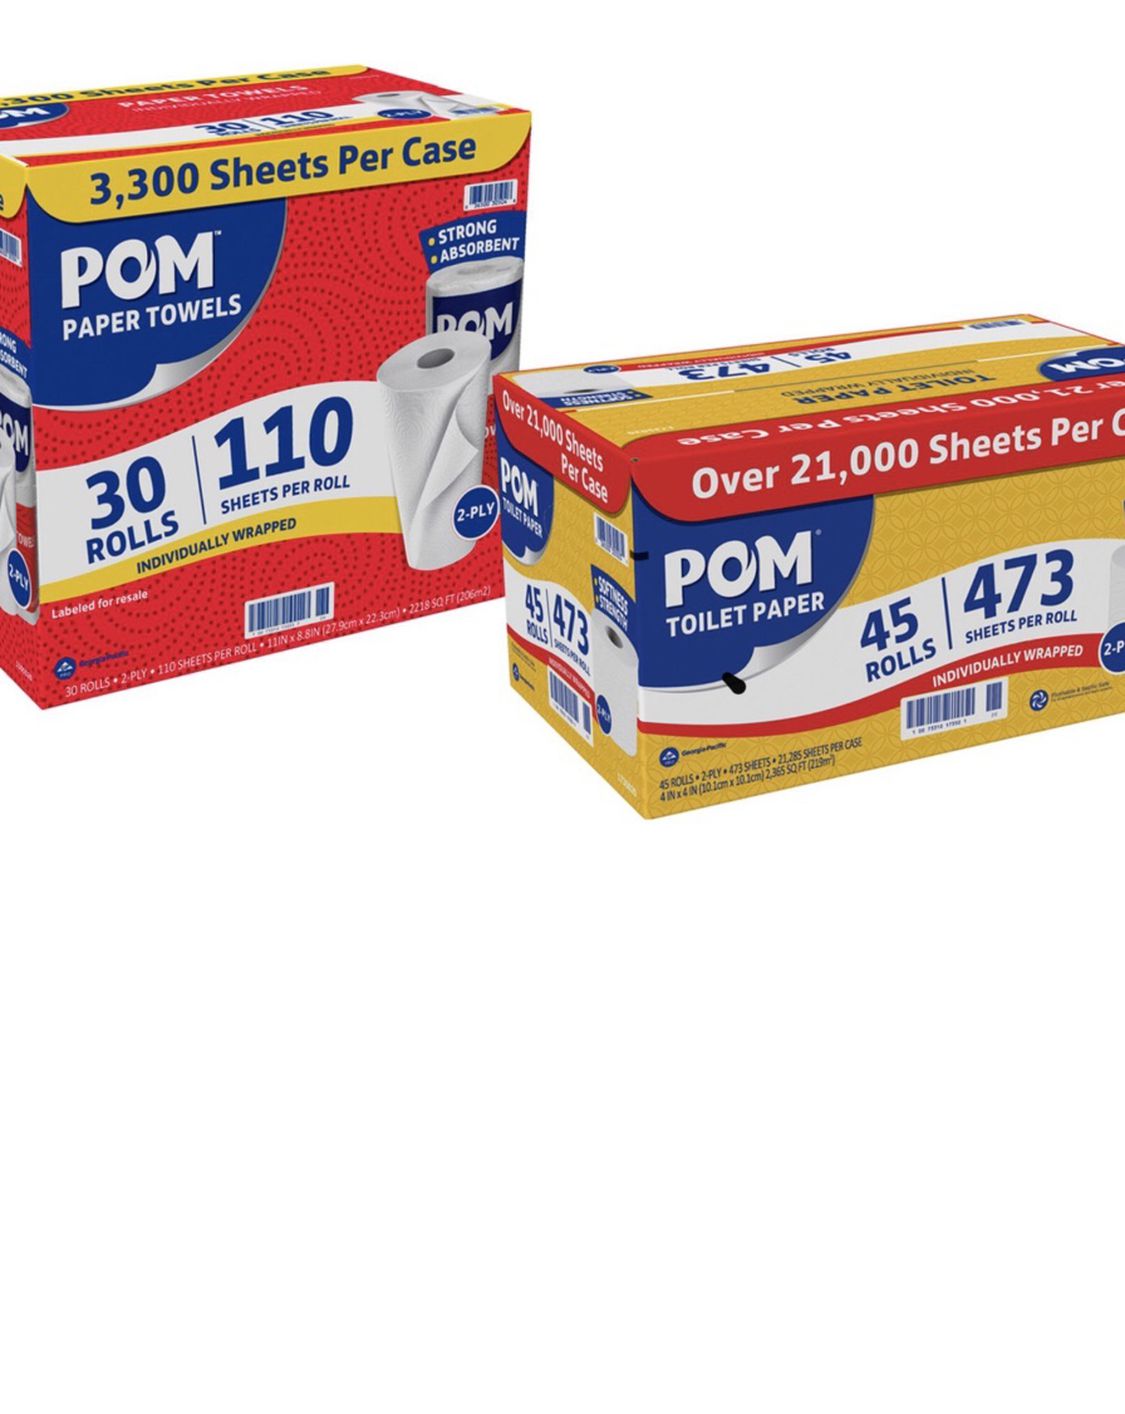 Pom Bath Tissue And Pom paper Towels In Stock